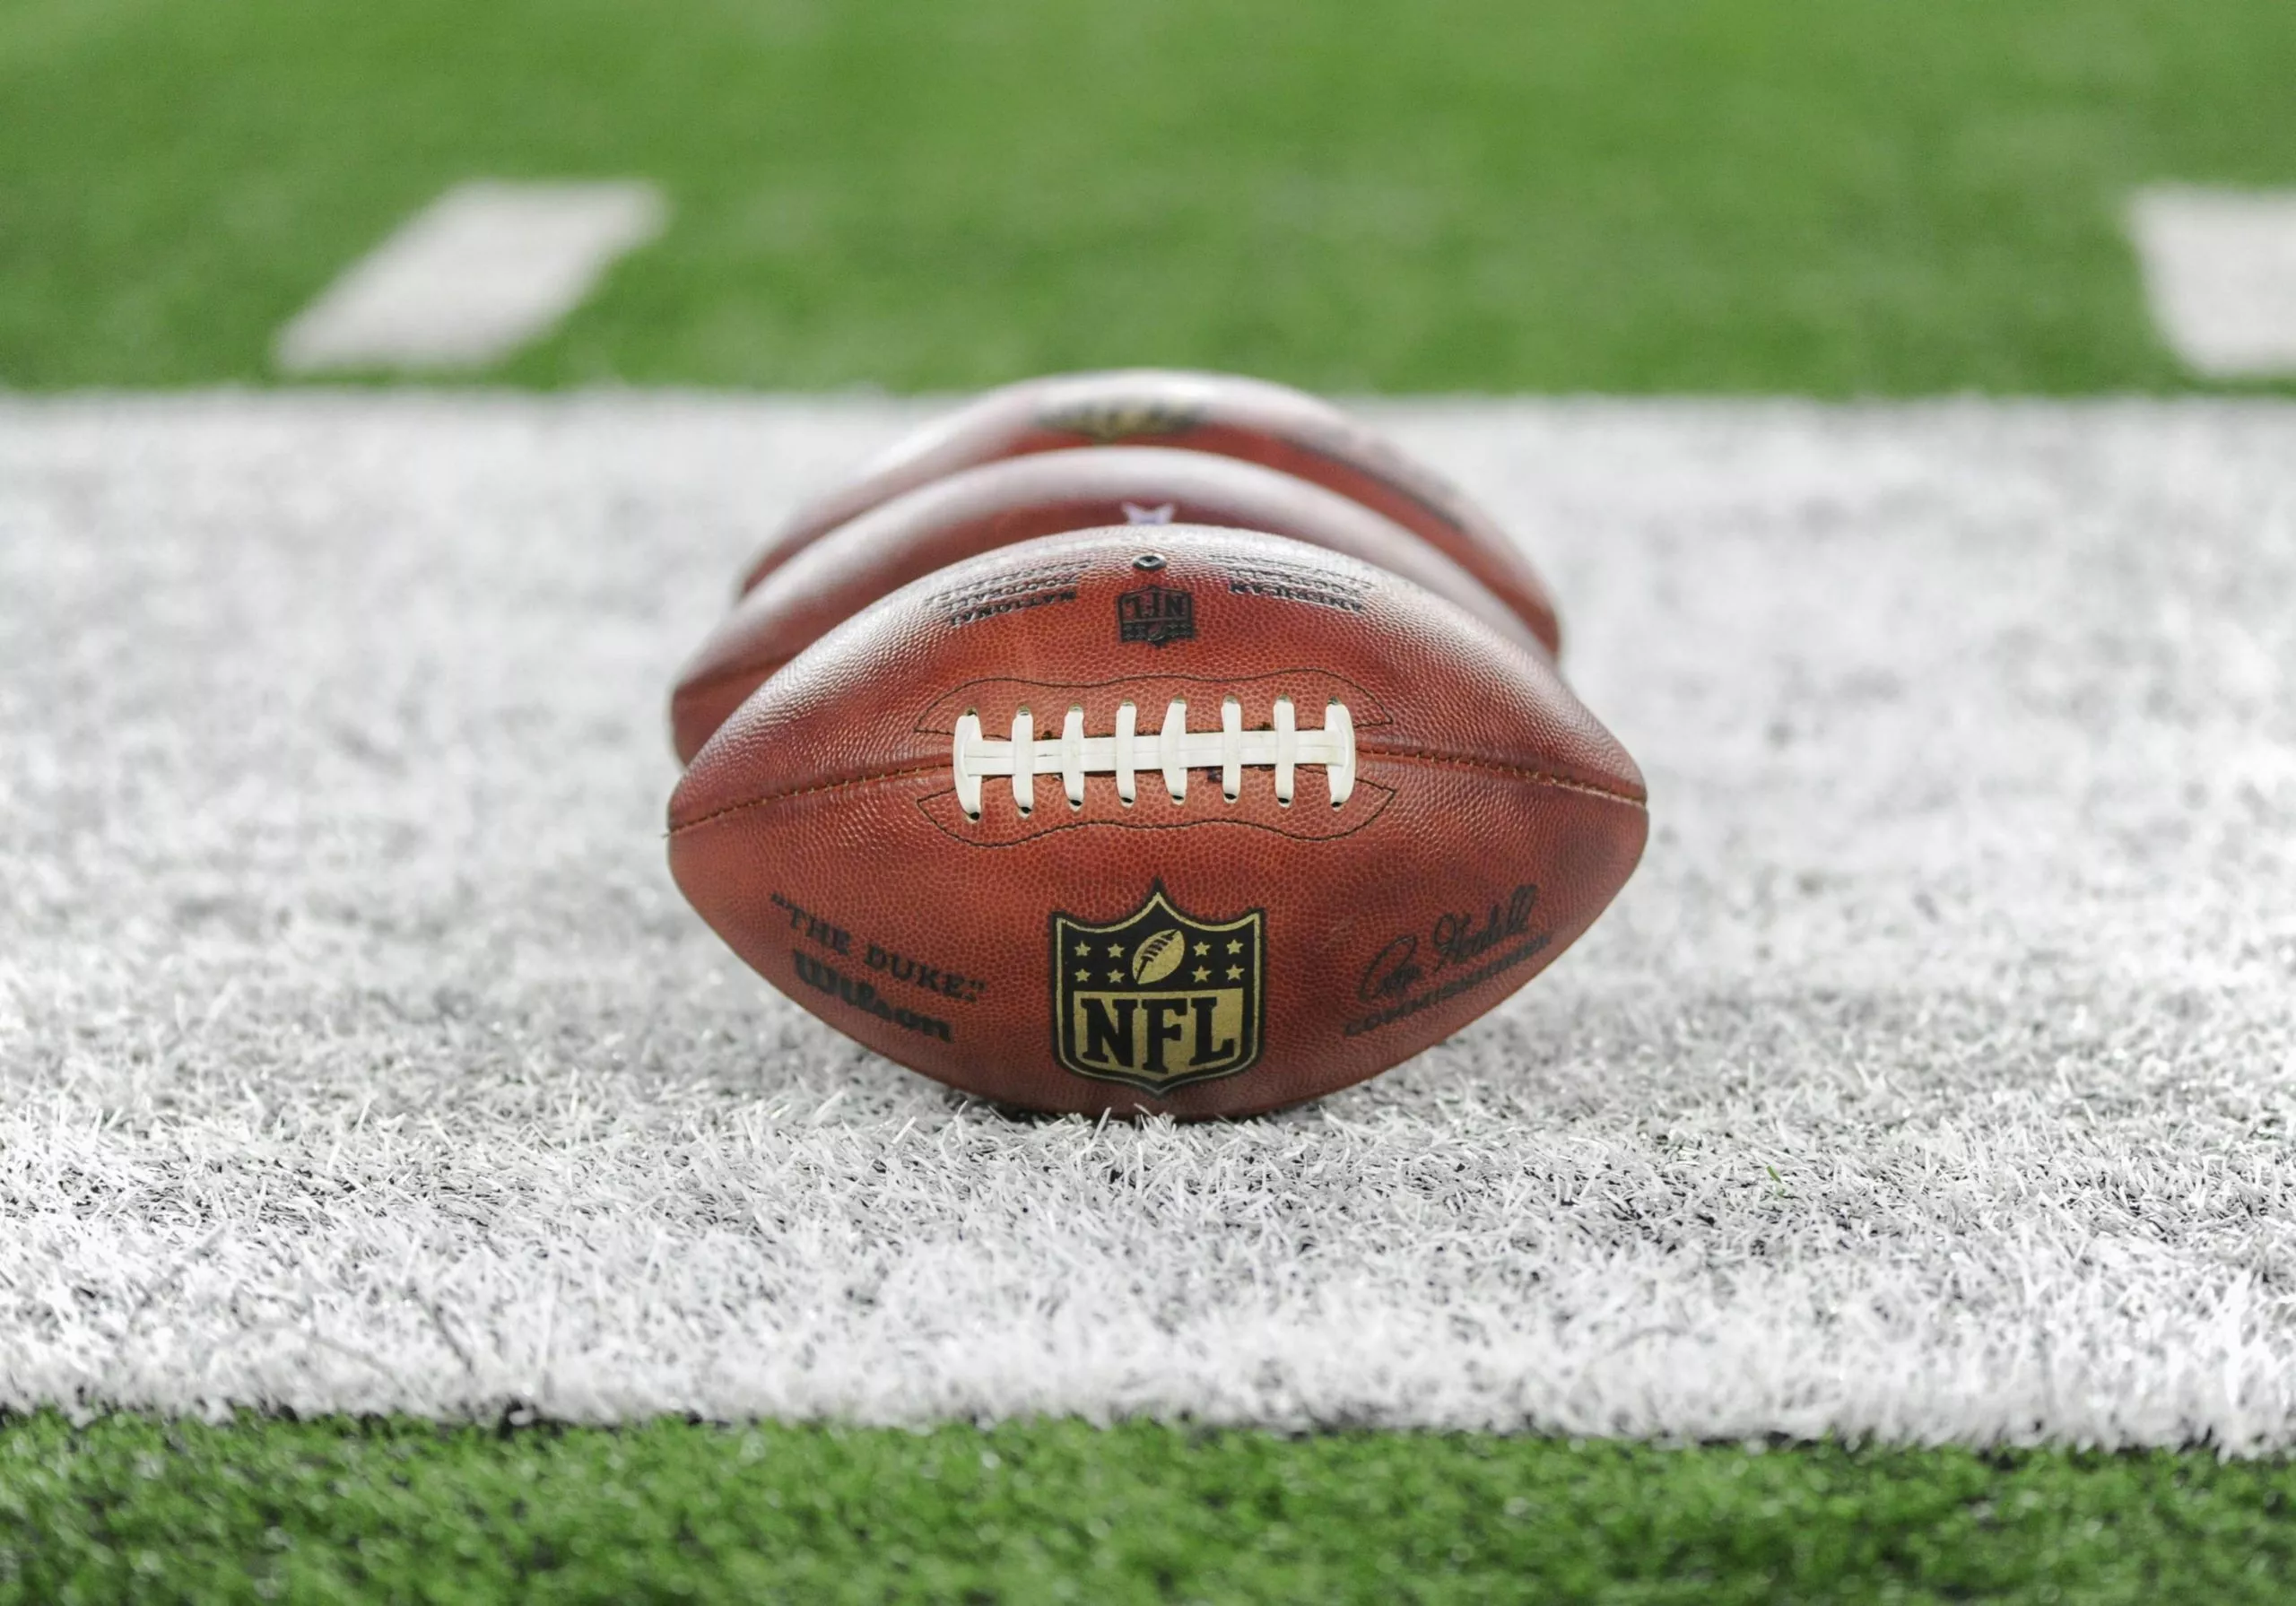 NFL Trade Deadline The practice footballs sit on the field during an NFL American Football Herren USA